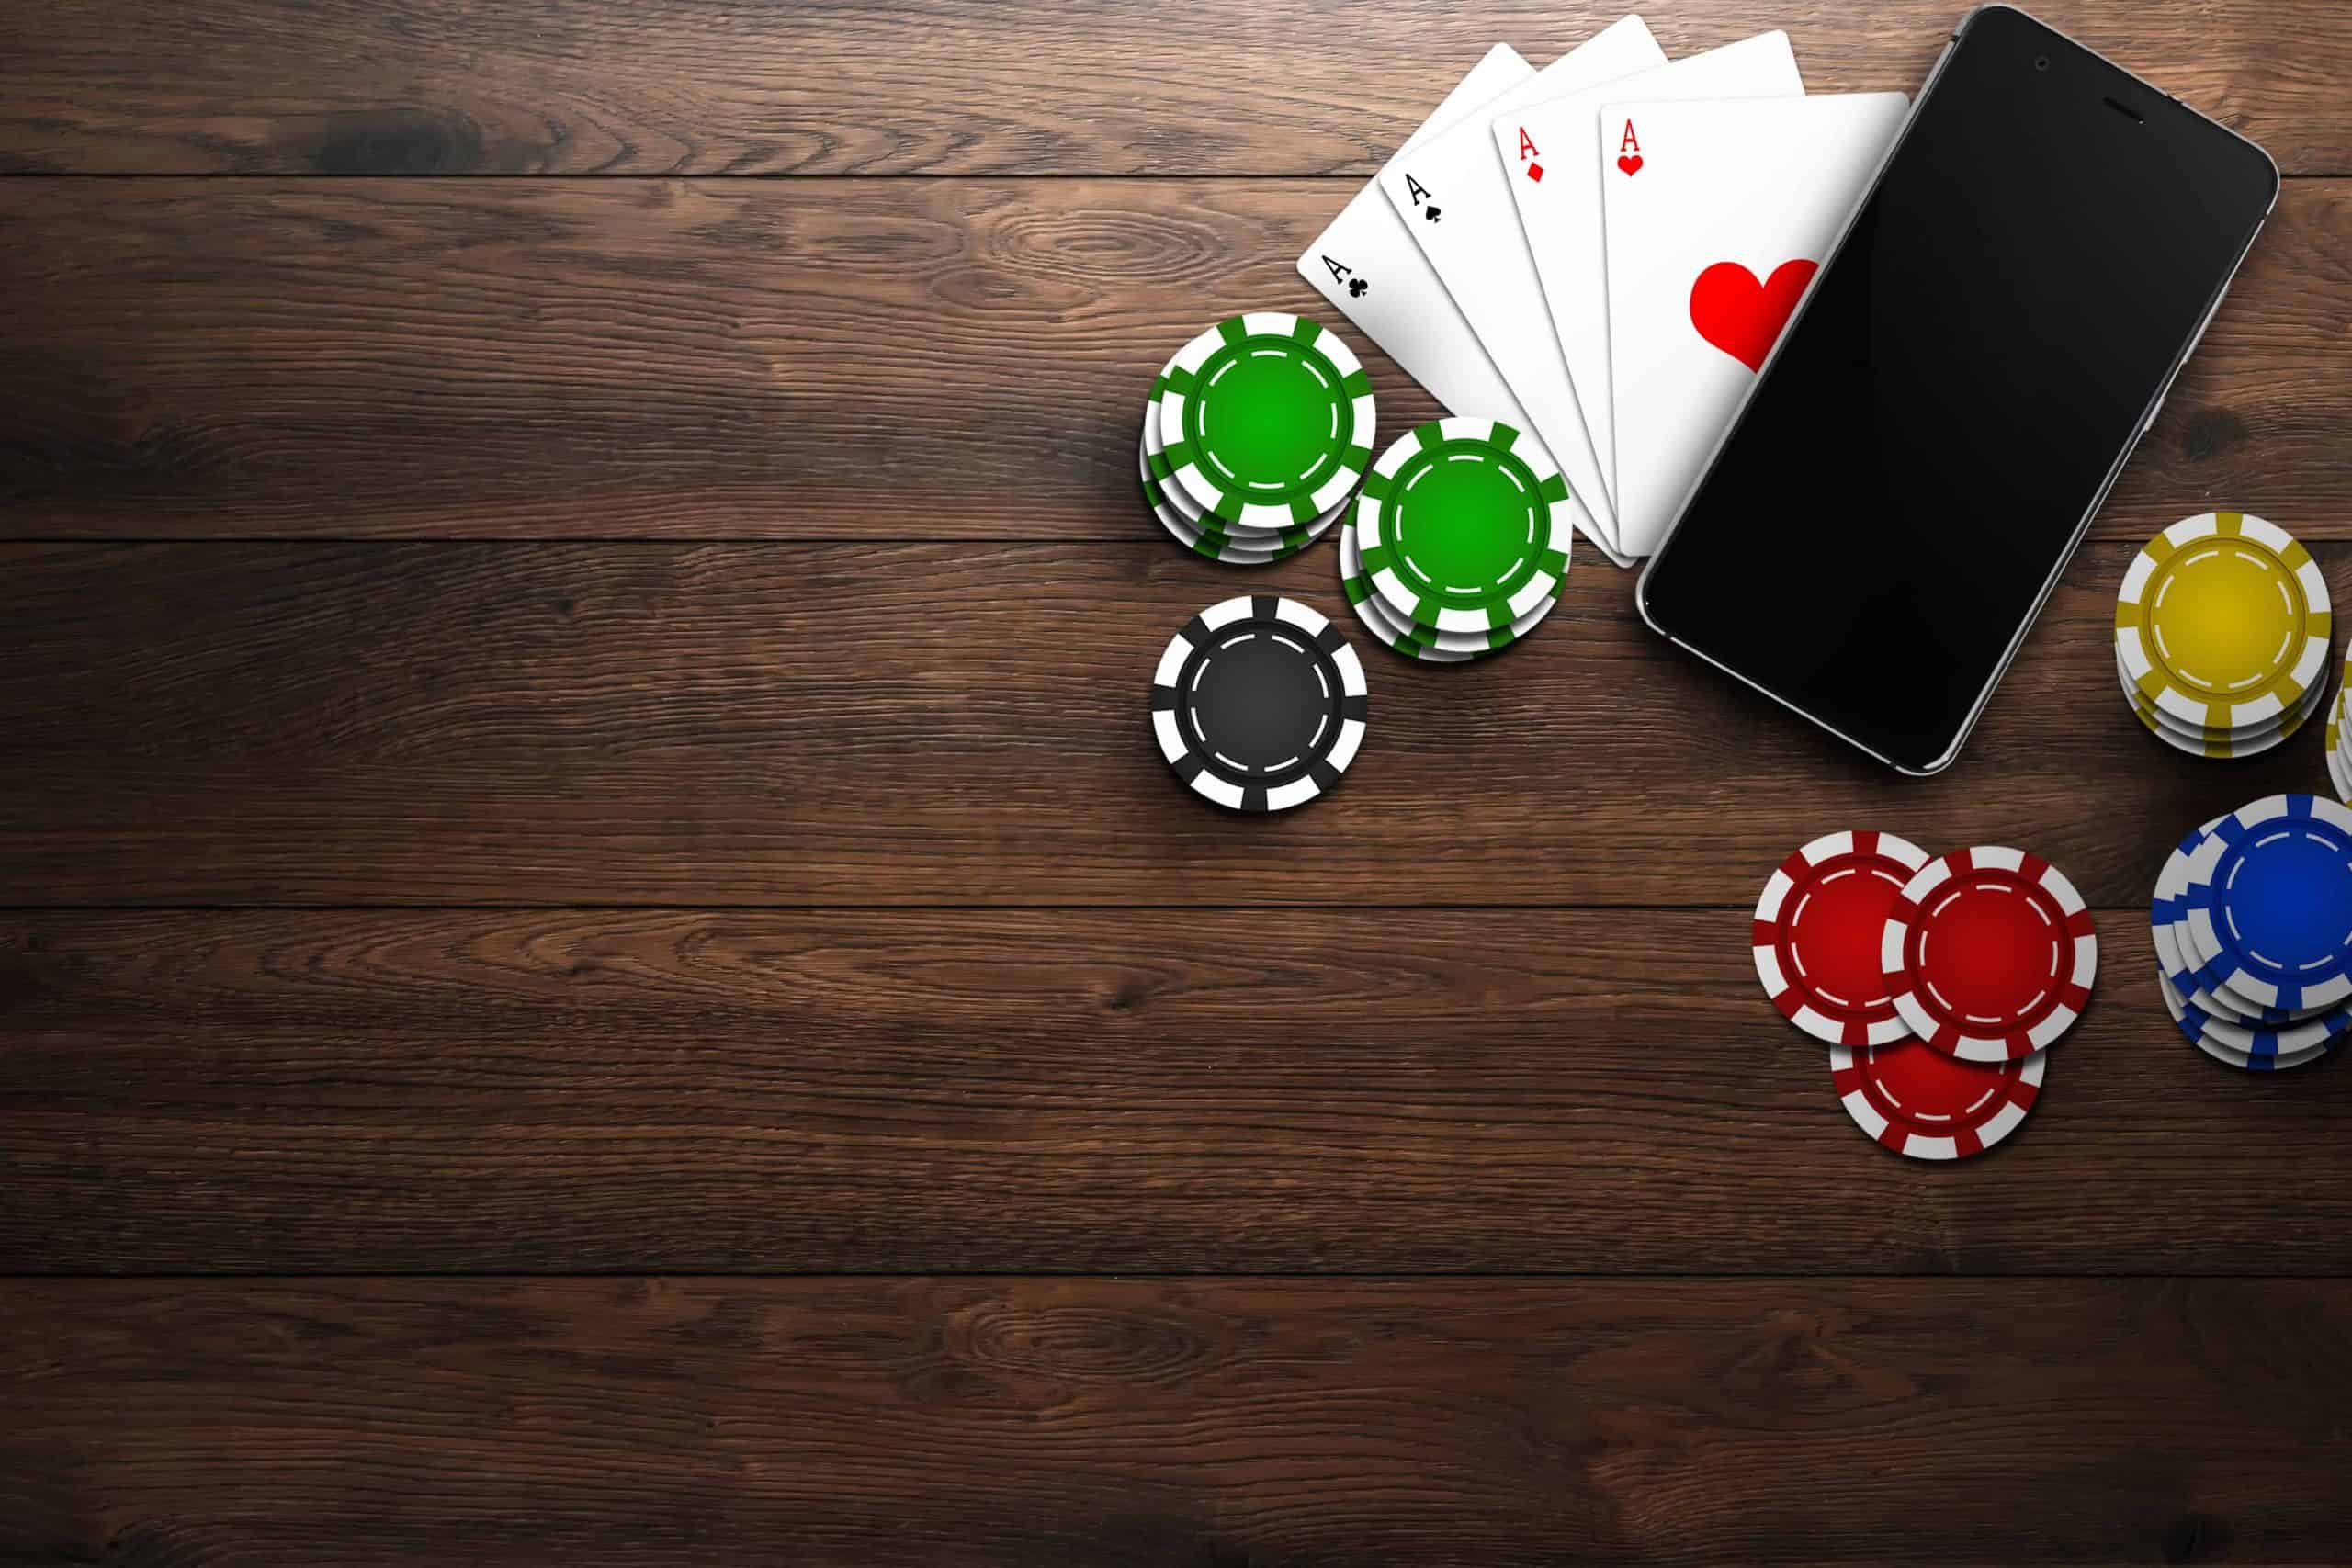 Tips for Choosing a Mobile Casino for Gaming on the Go